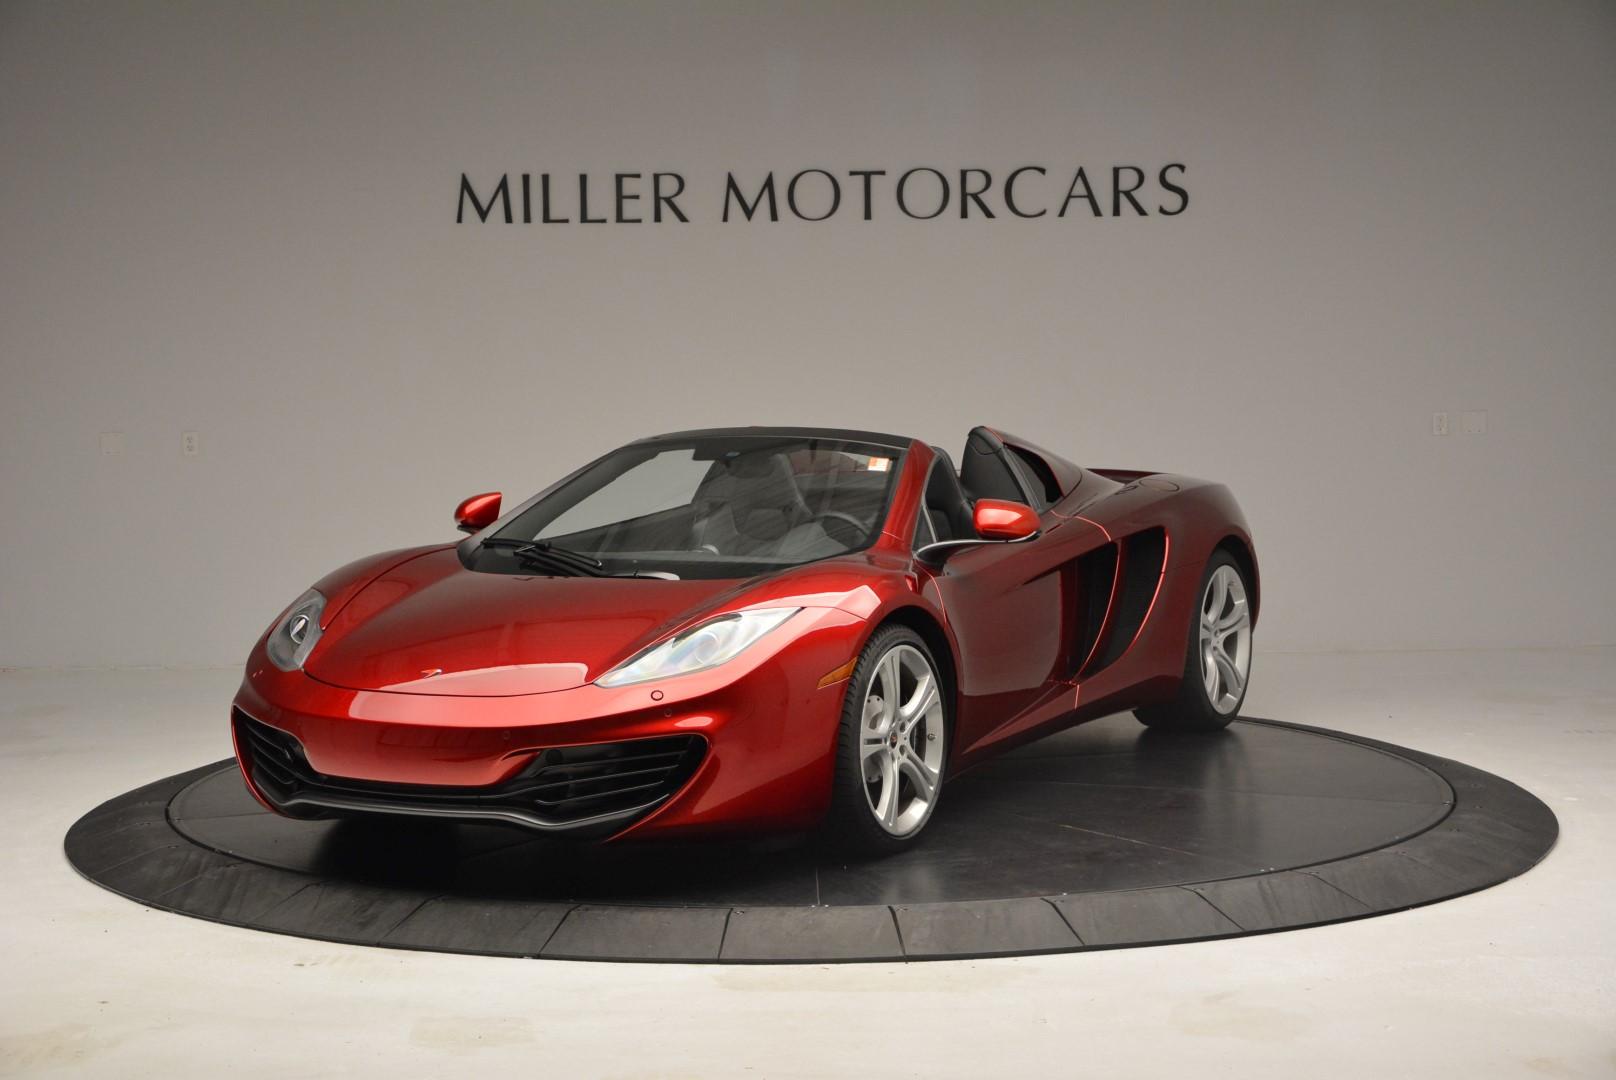 Used 2013 McLaren 12C Spider for sale Sold at Bentley Greenwich in Greenwich CT 06830 1